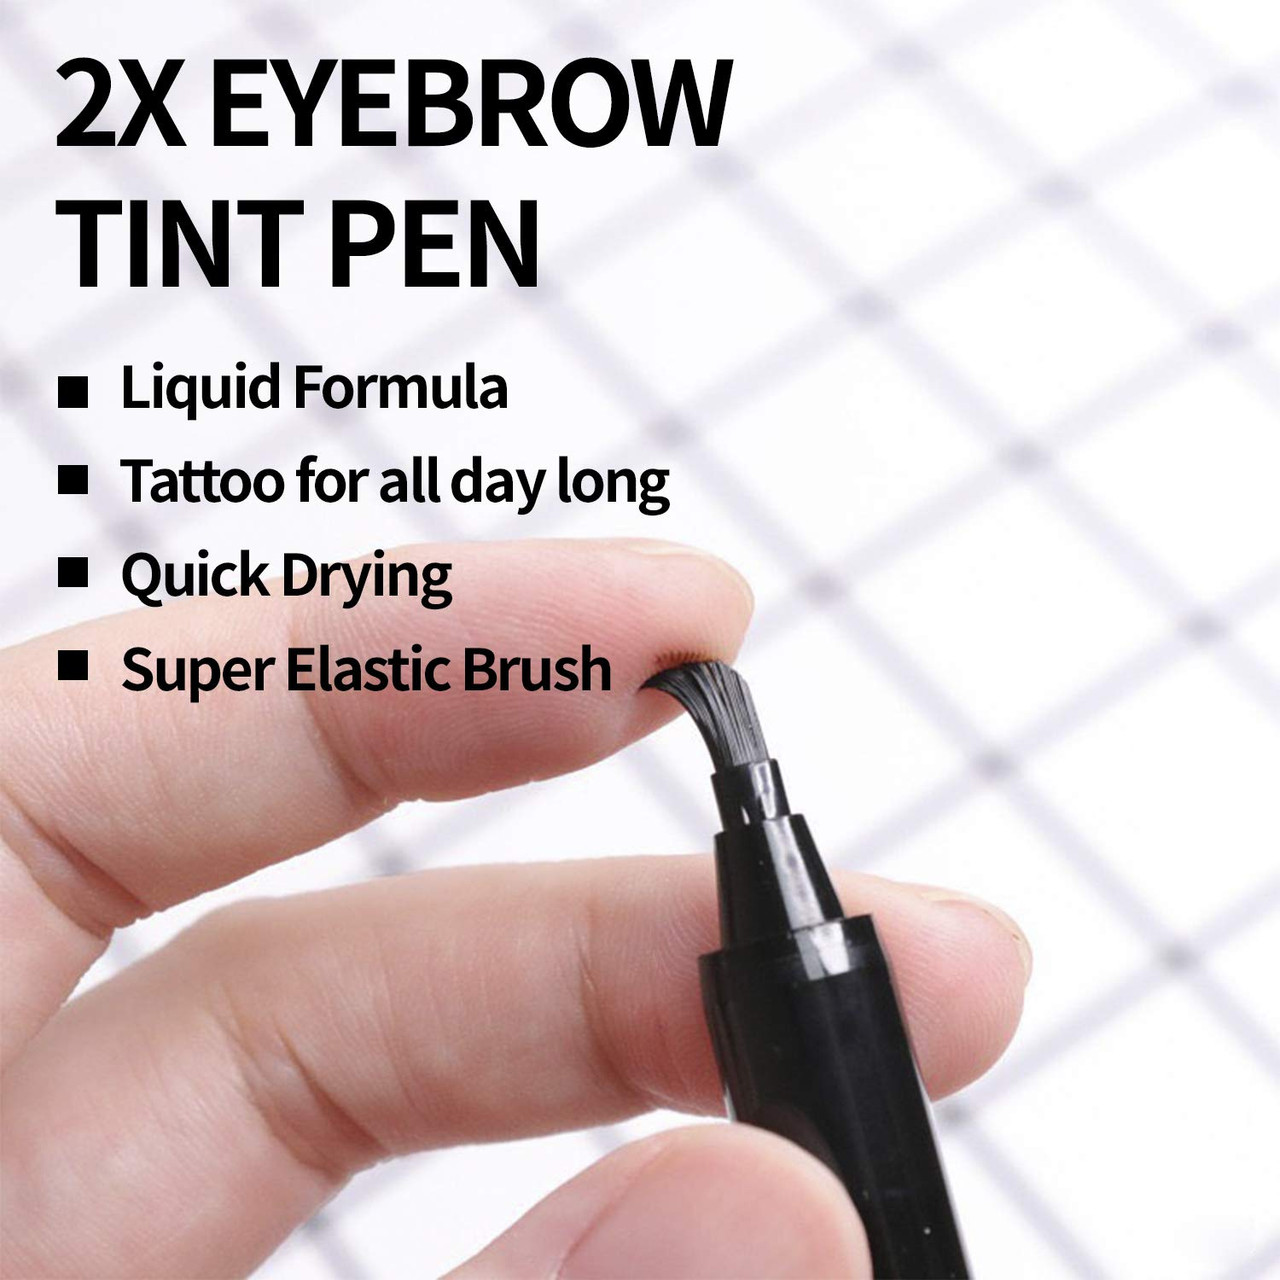 Music Flower Eyebrow Tattoo Pen Microblading Eyebrows Pencil Tattoos Brow  Ink Pens With A Micro Fork Tip Applicator Creates Natural Looking From 1,69  € | DHgate